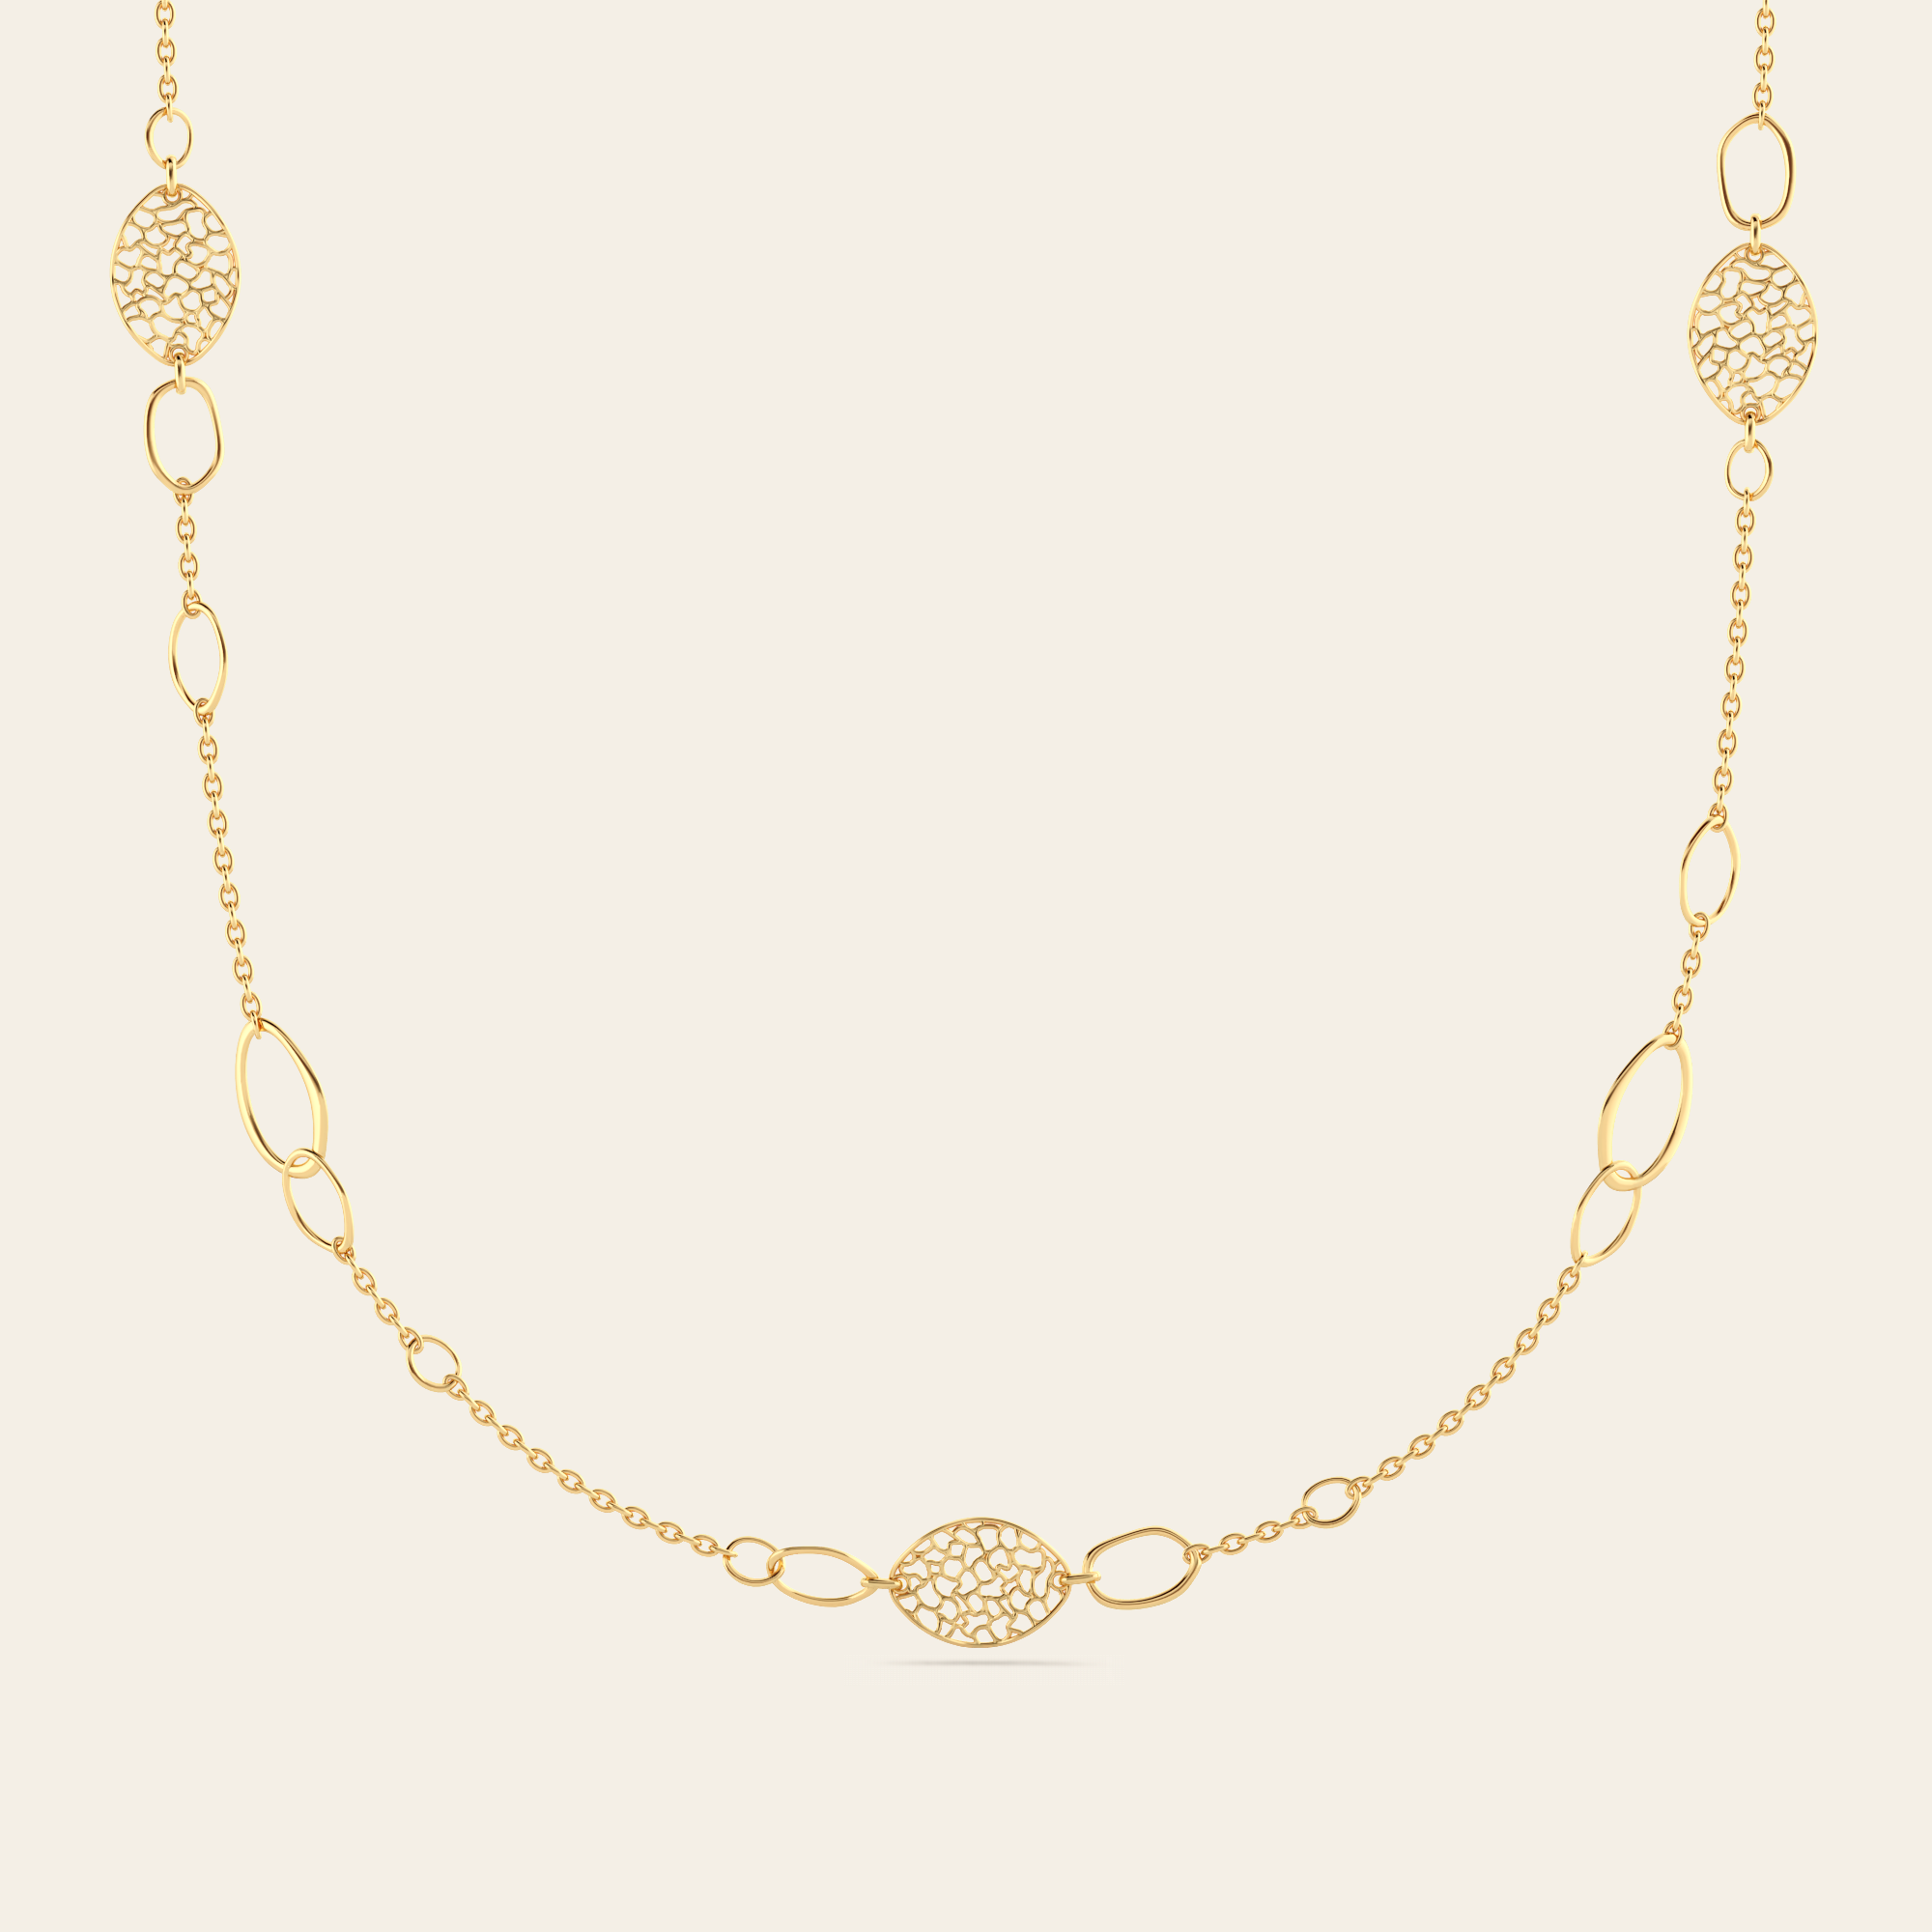 Cracked Earth Chain Necklace in 18k Yellow Gold